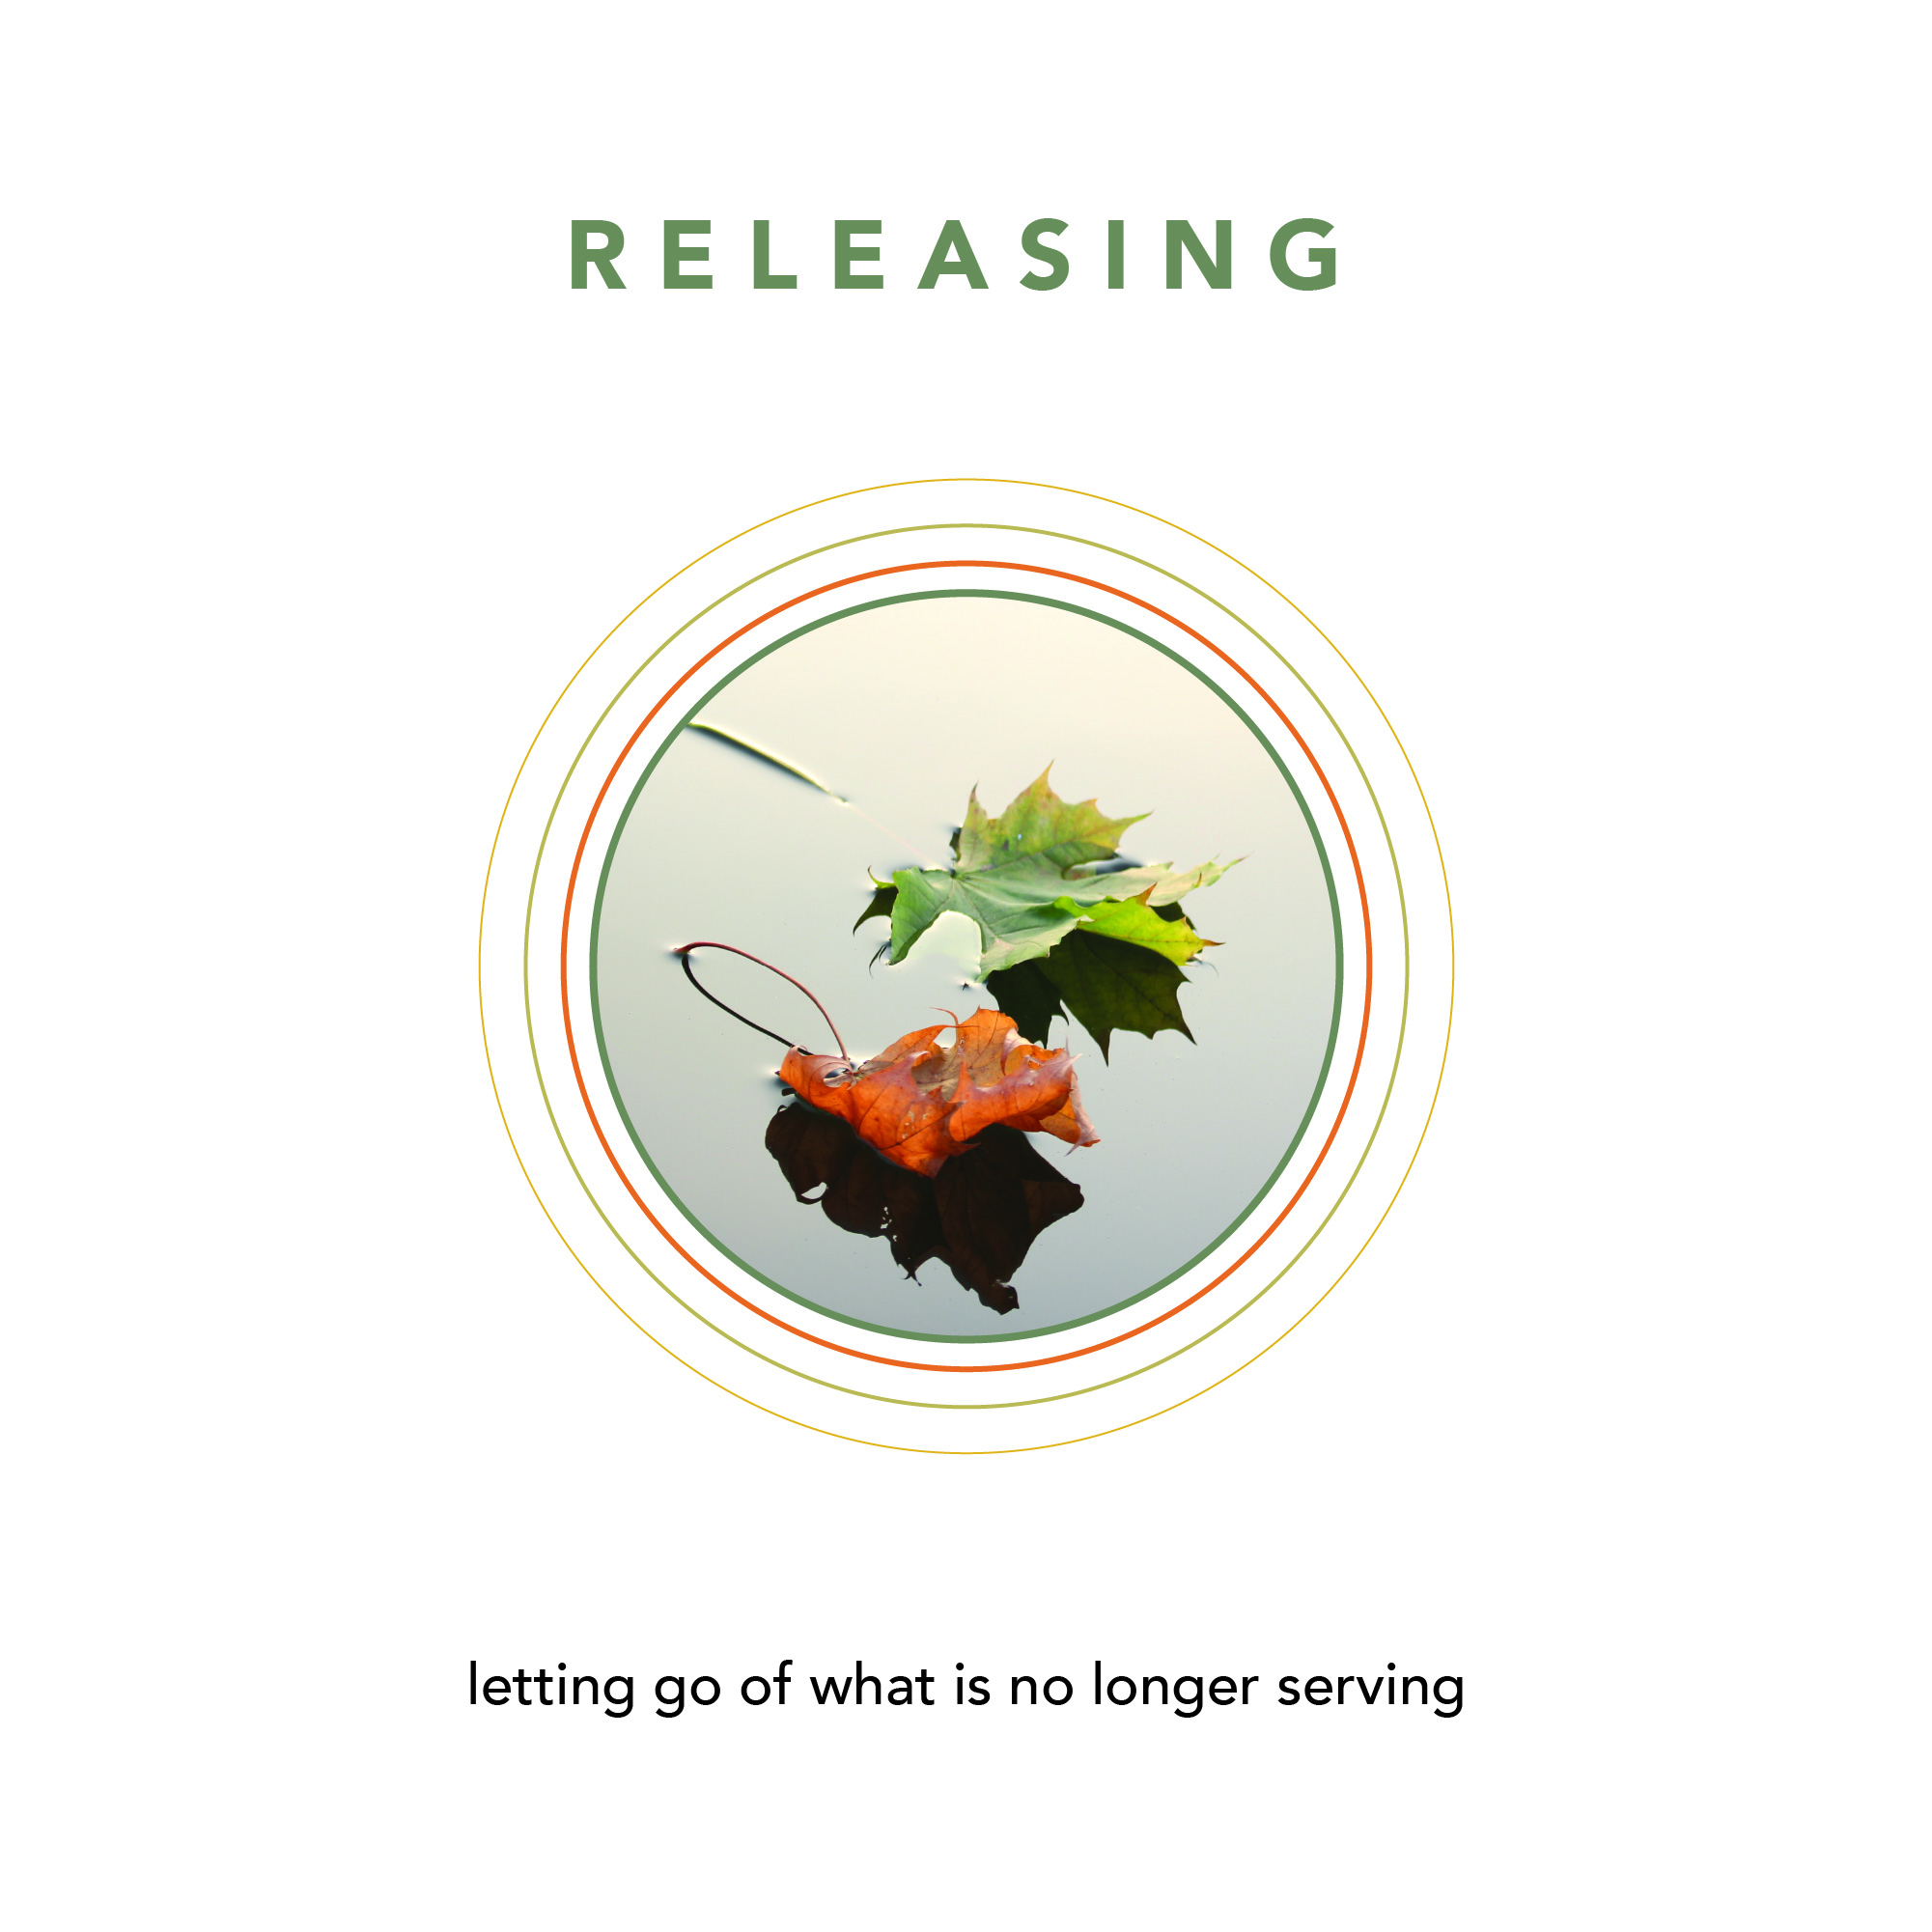 RELEASING - letting go of what is no longer serving